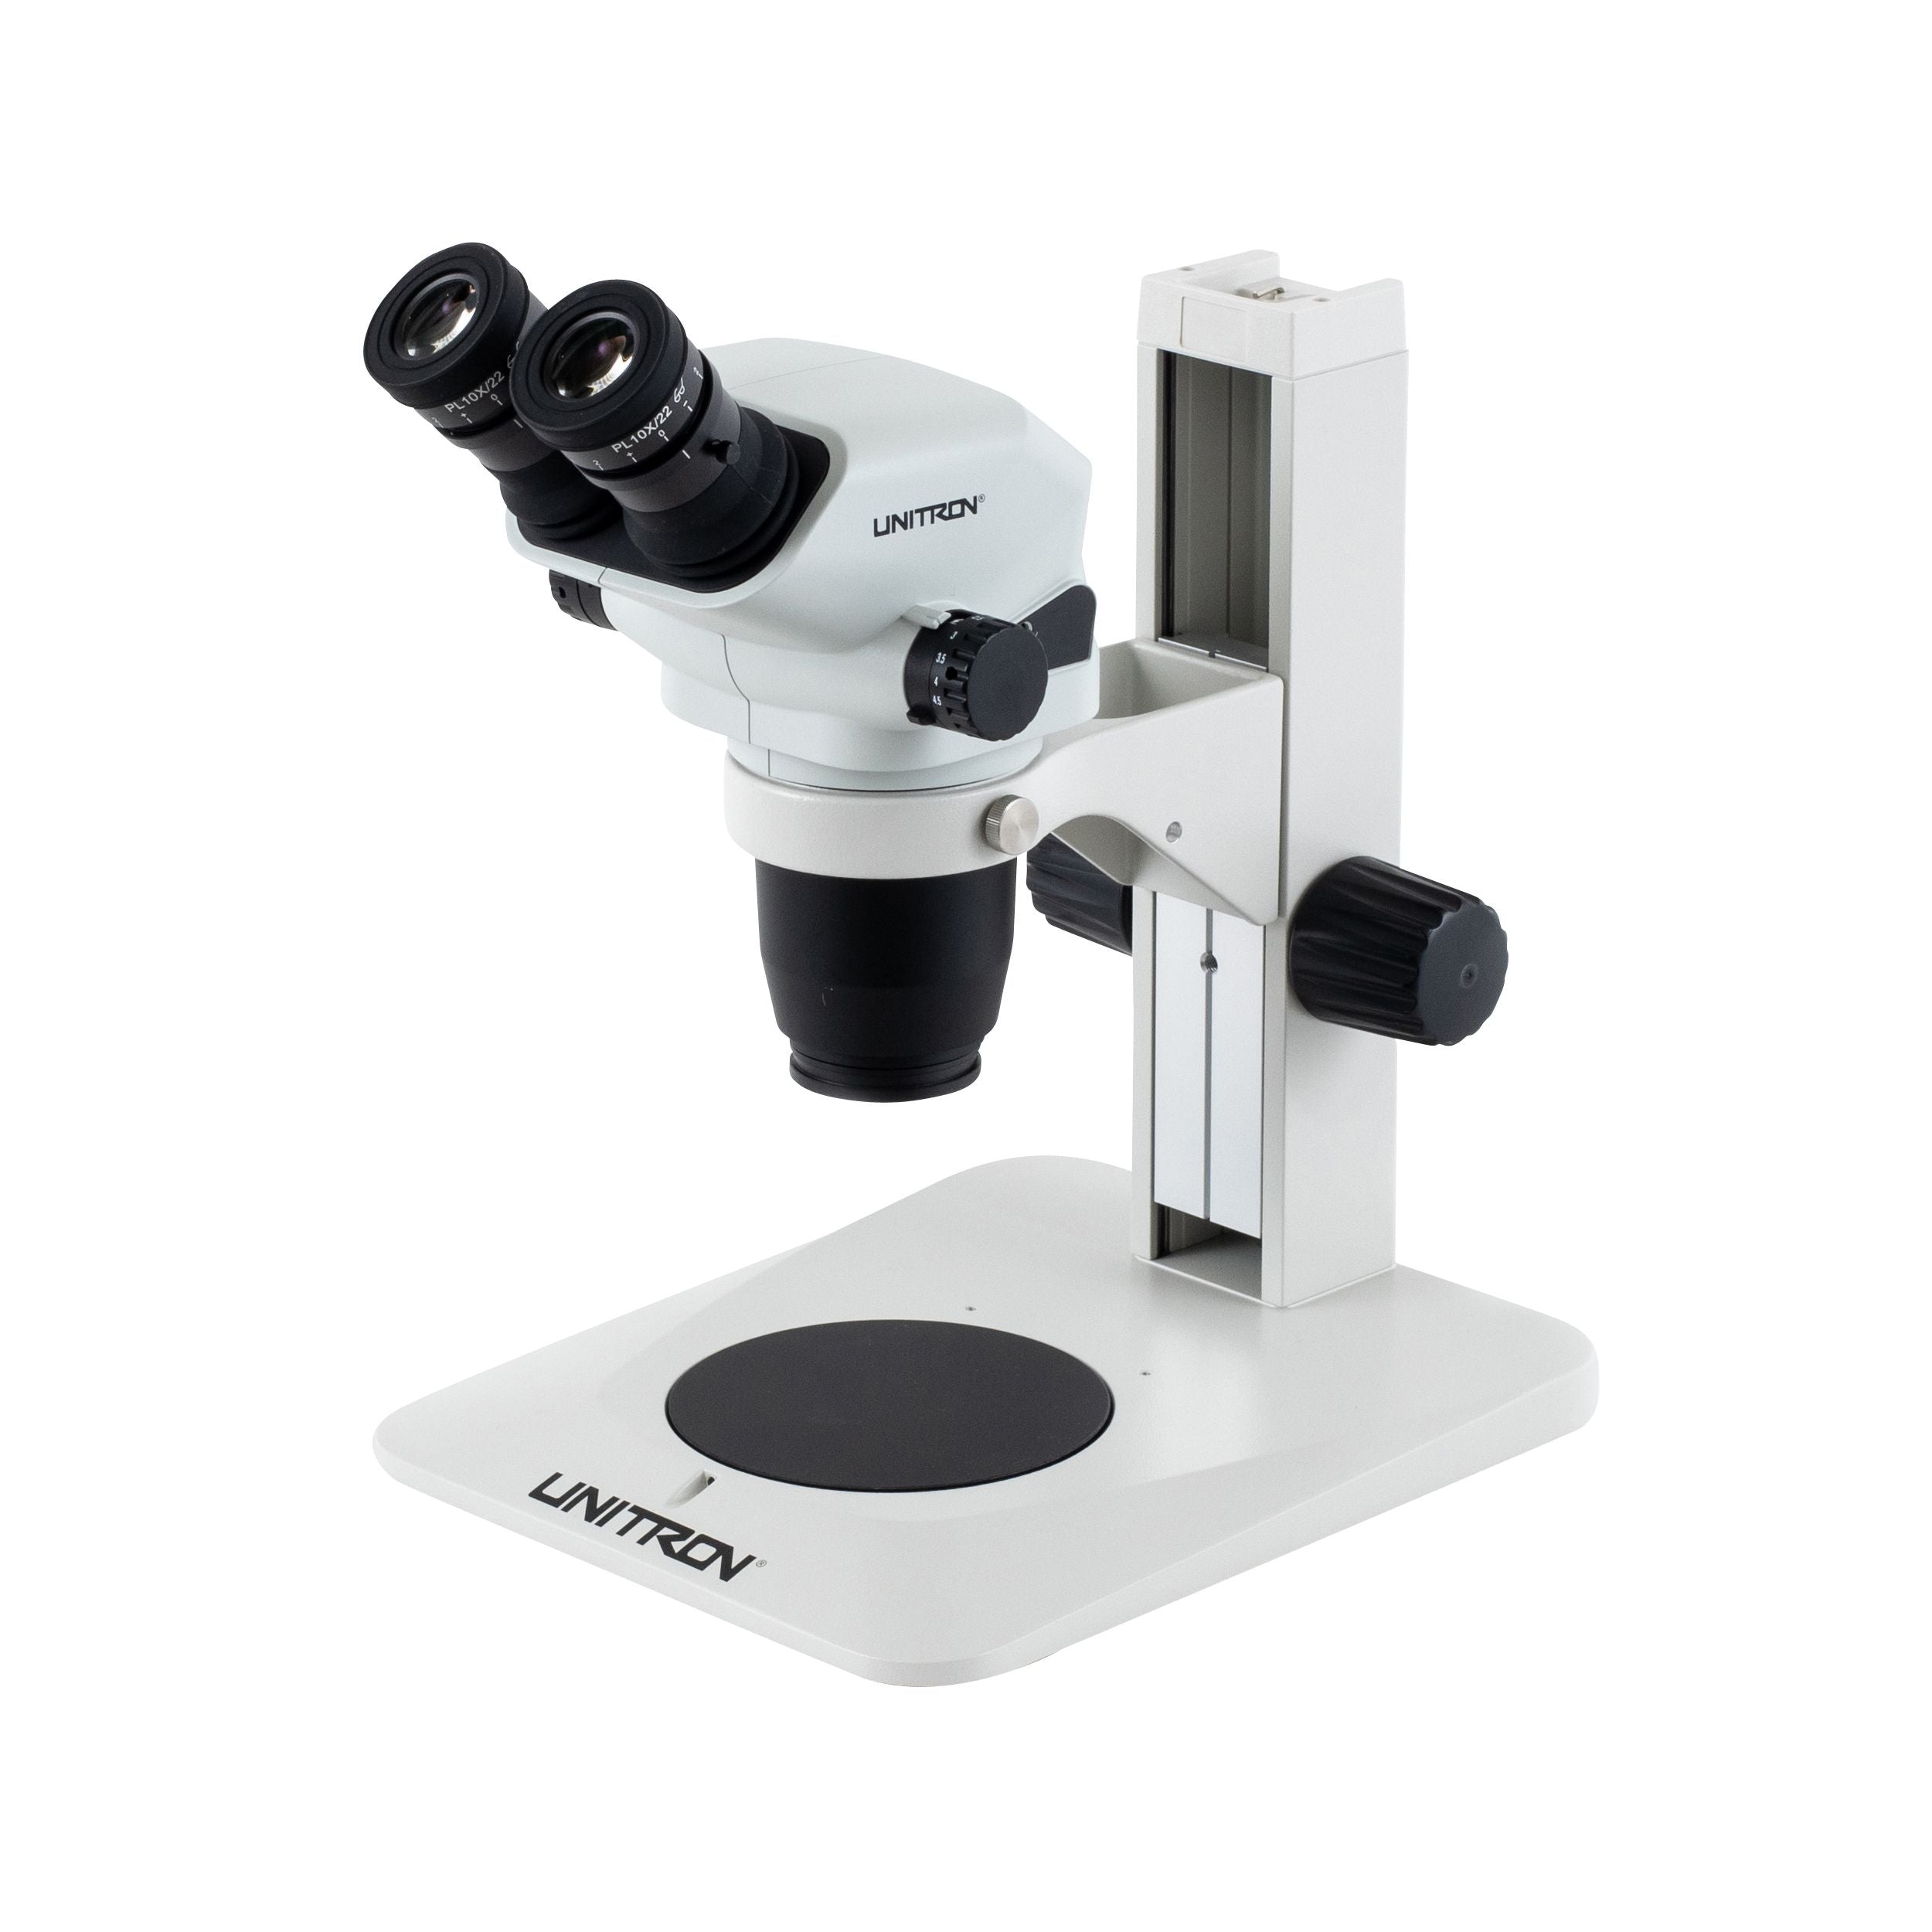 AmScope 3.5X-45X Stereo Inspection Microscope with Super Large